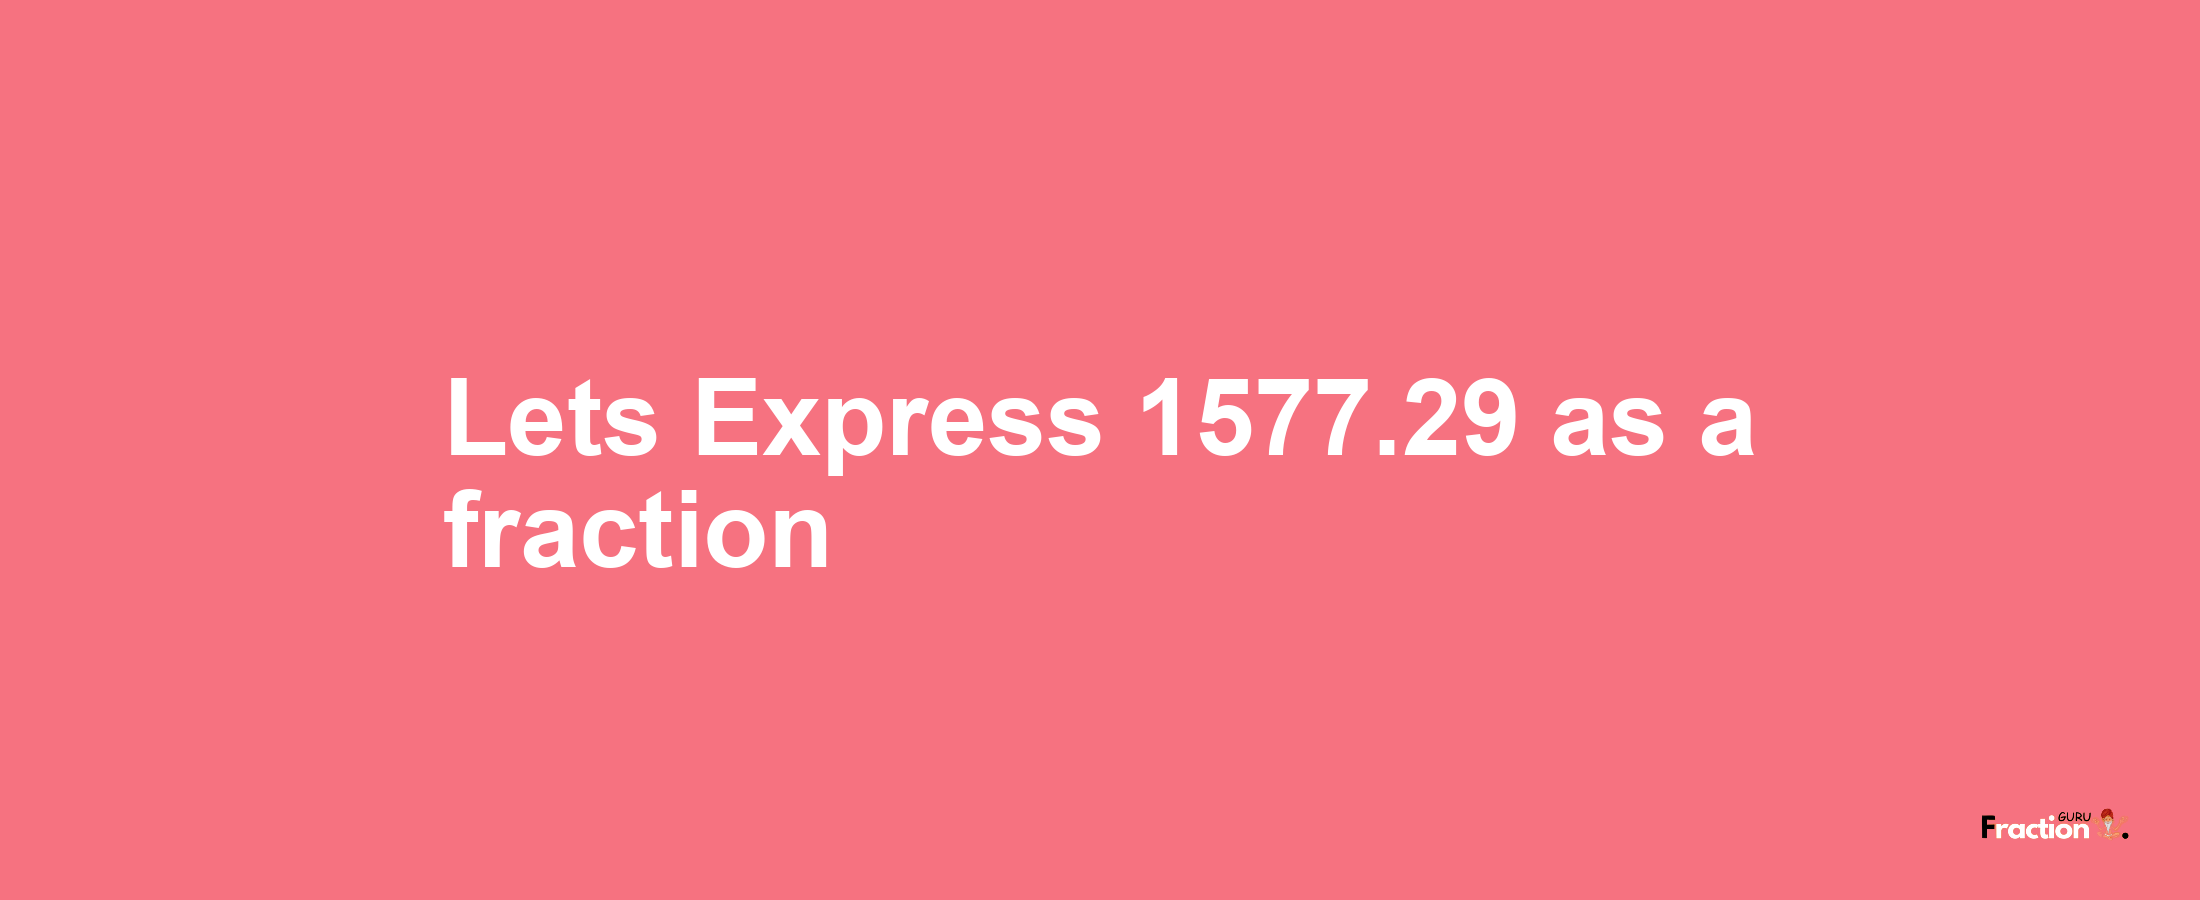 Lets Express 1577.29 as afraction